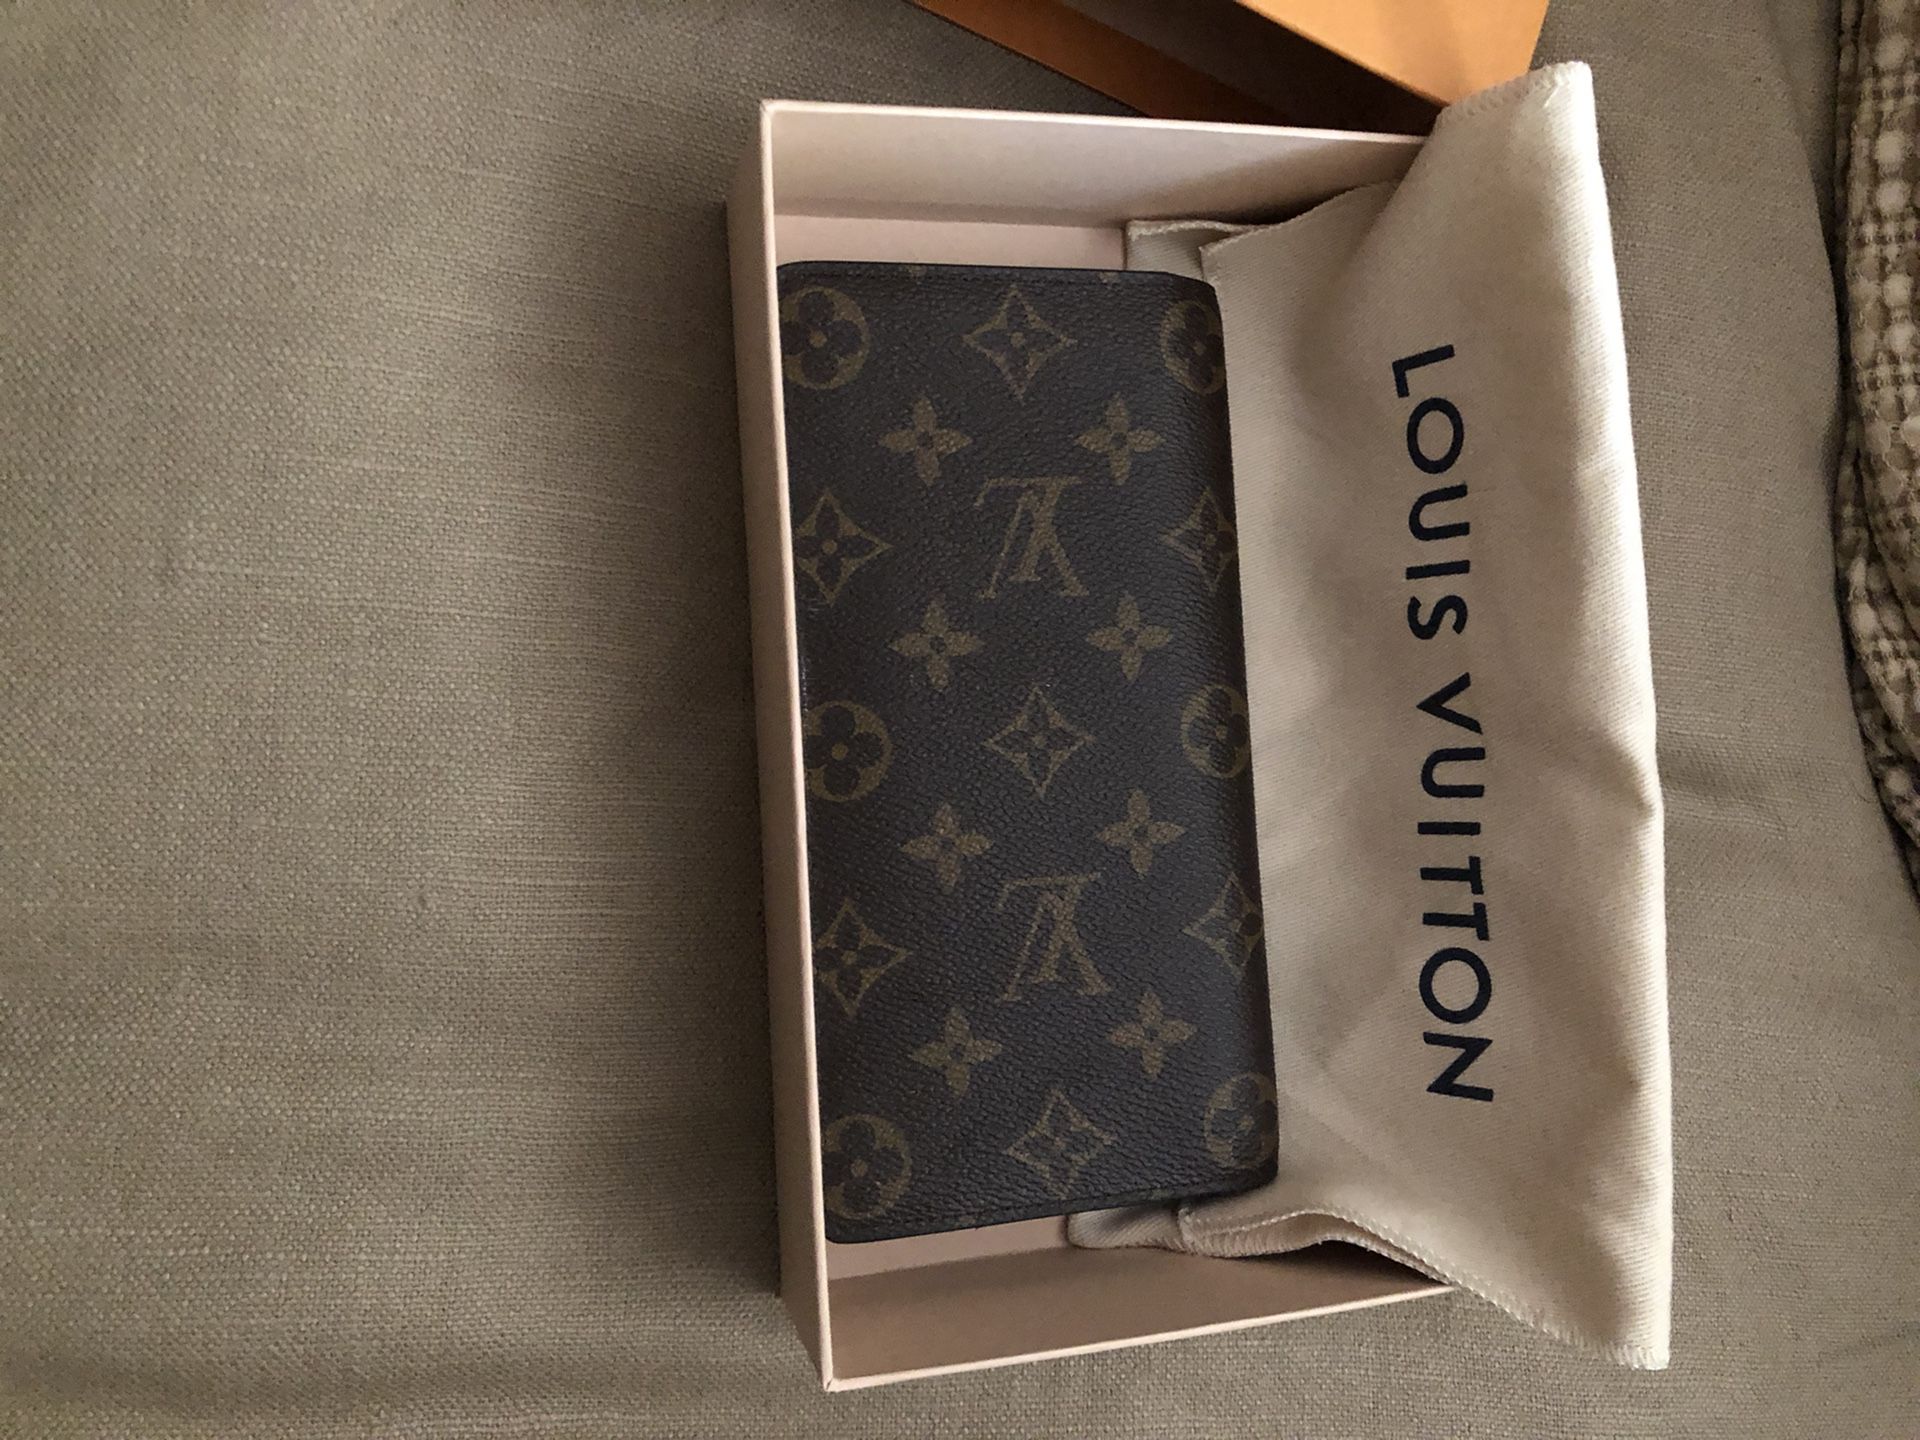 Louis Vuitton wallet, used it 3 days and decided to get a bifold wallet instead. asking 200